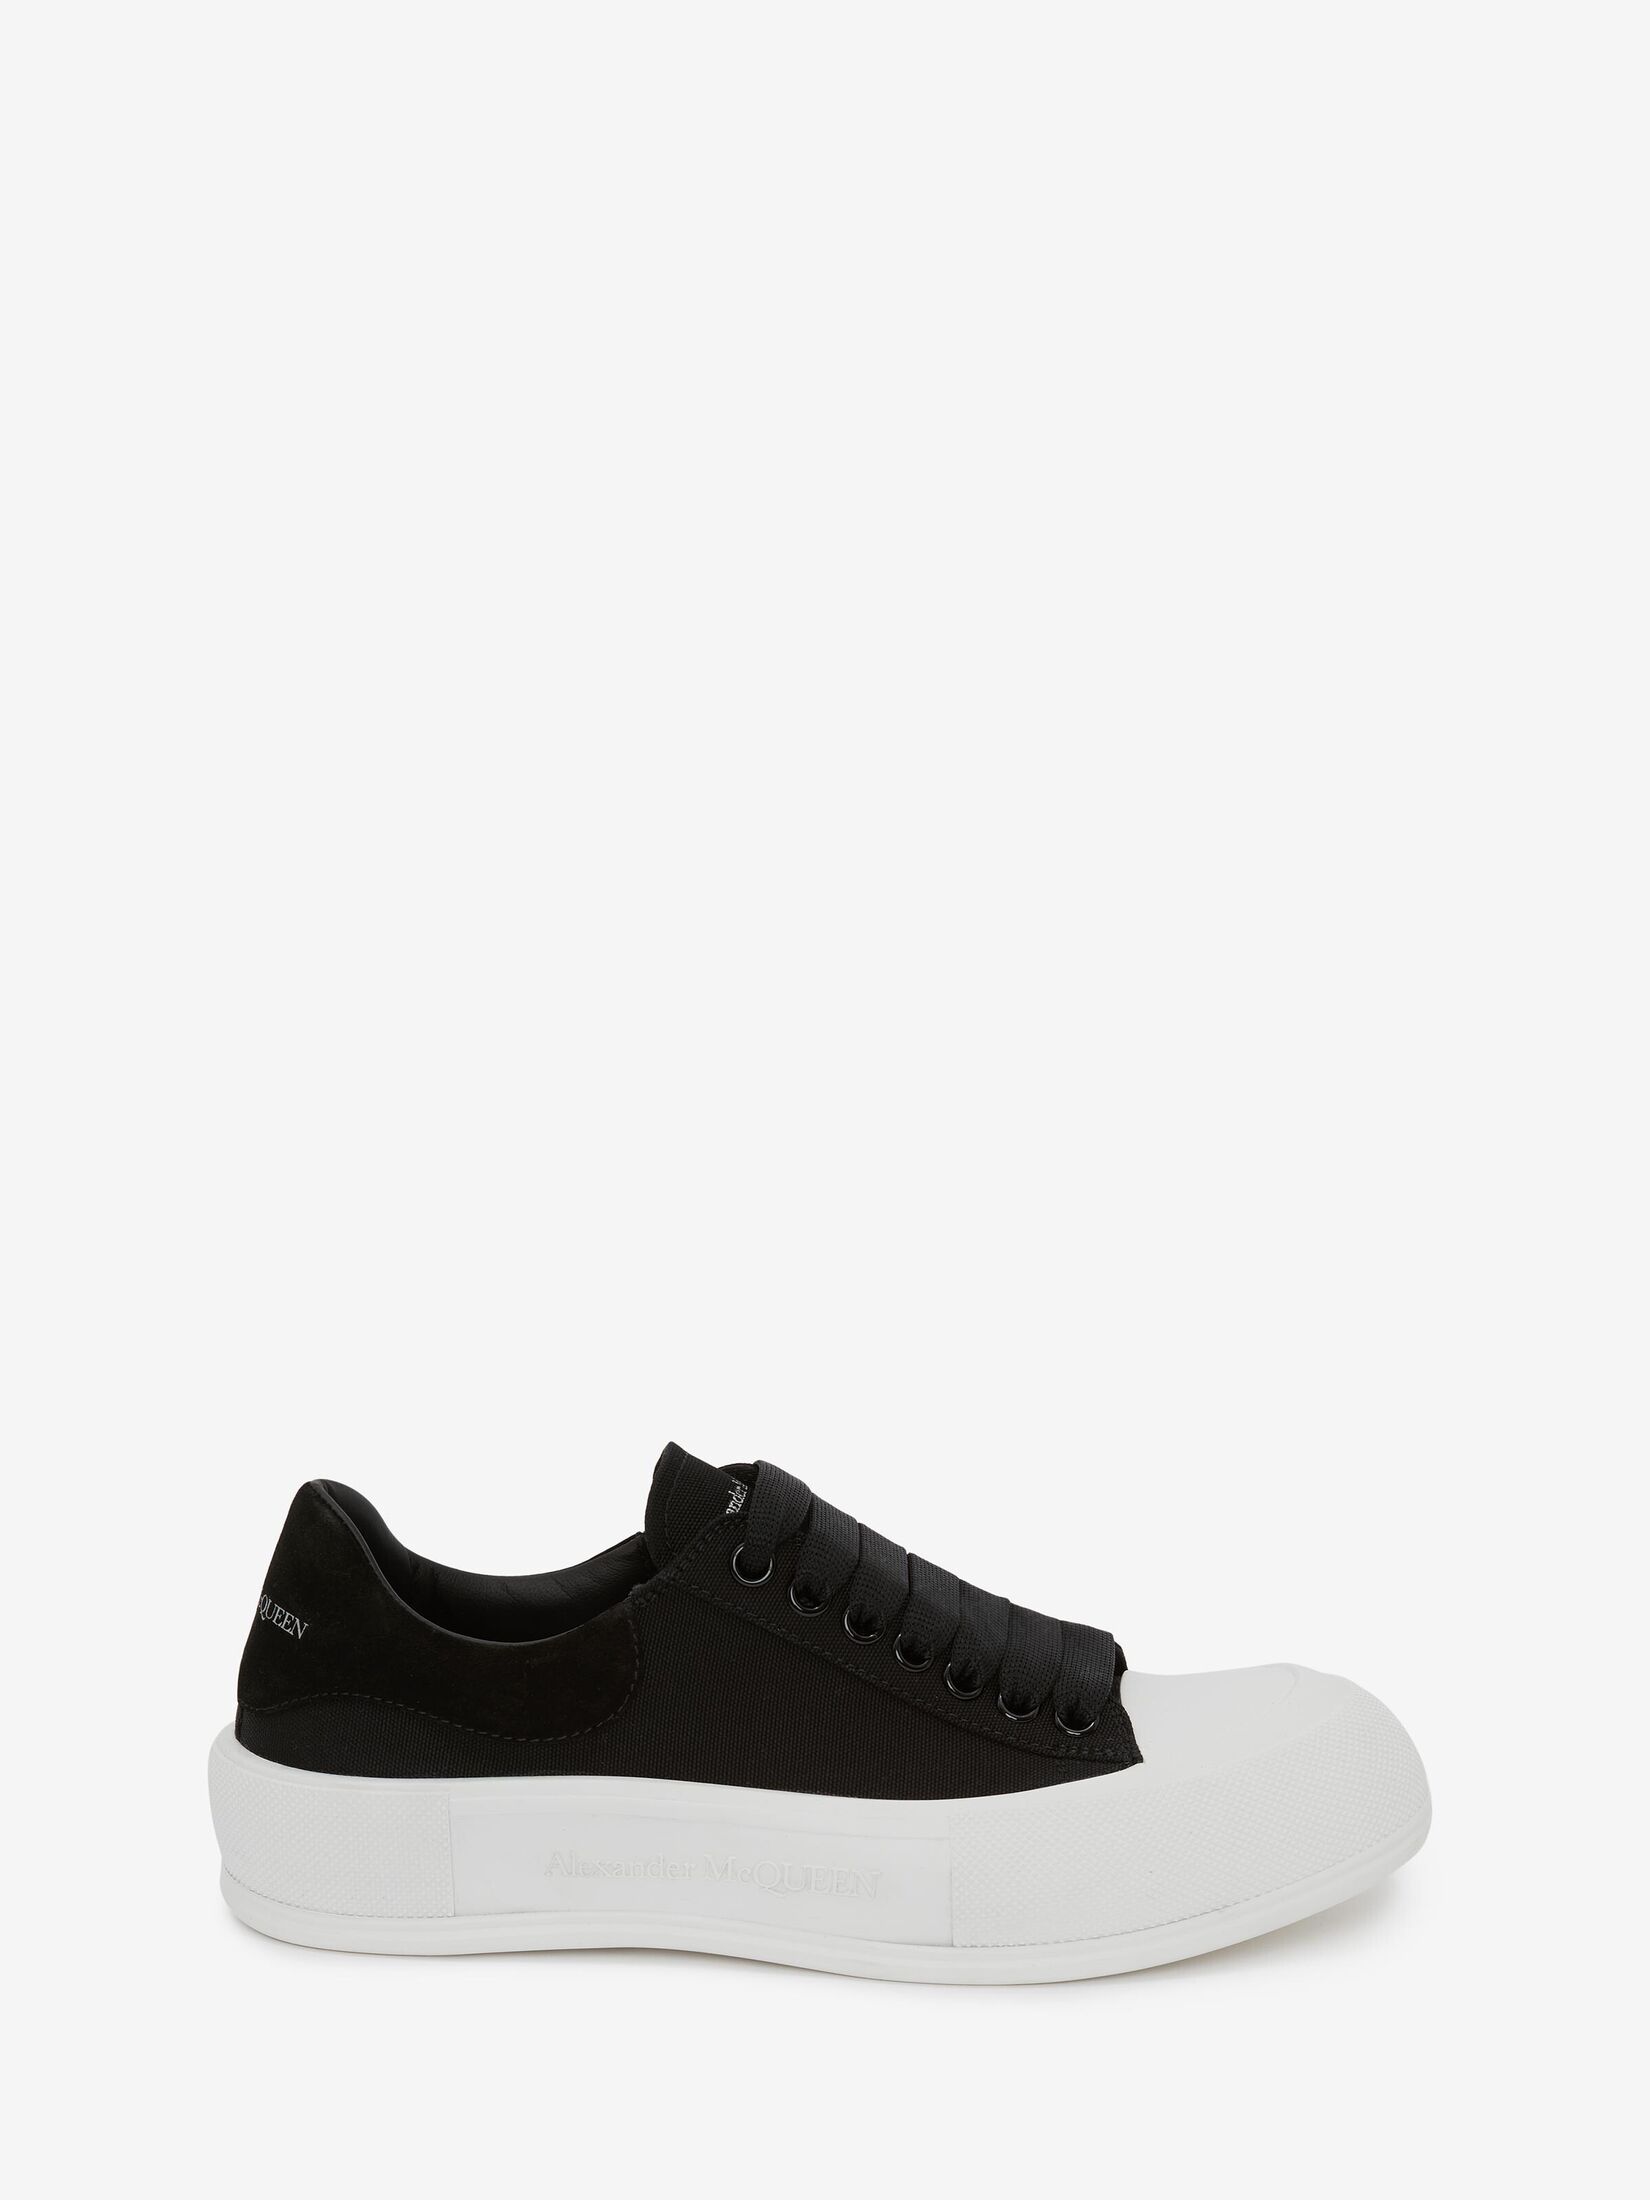 Deck Lace Up Plimsoll in Black/White | Alexander McQueen US